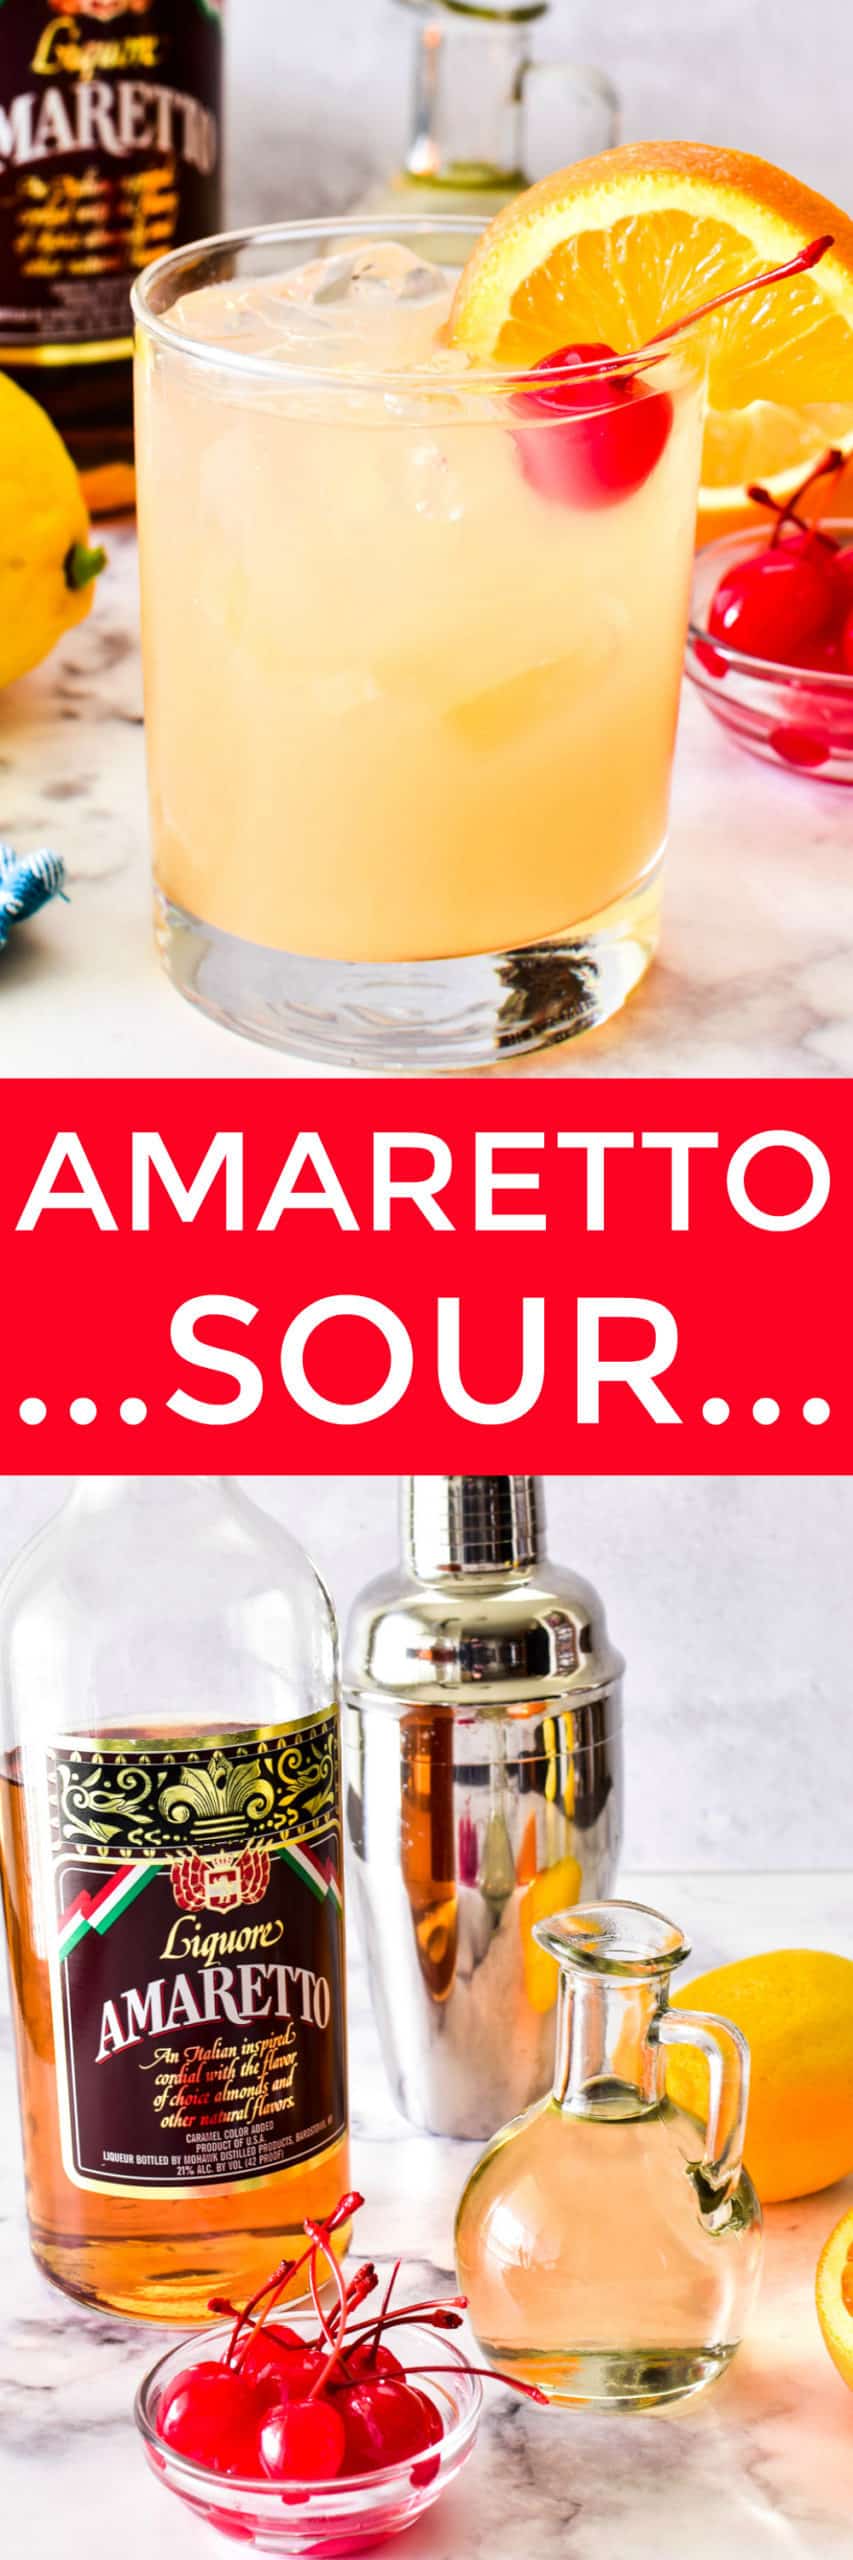 Collage image of Amaretto Sour with ingredients